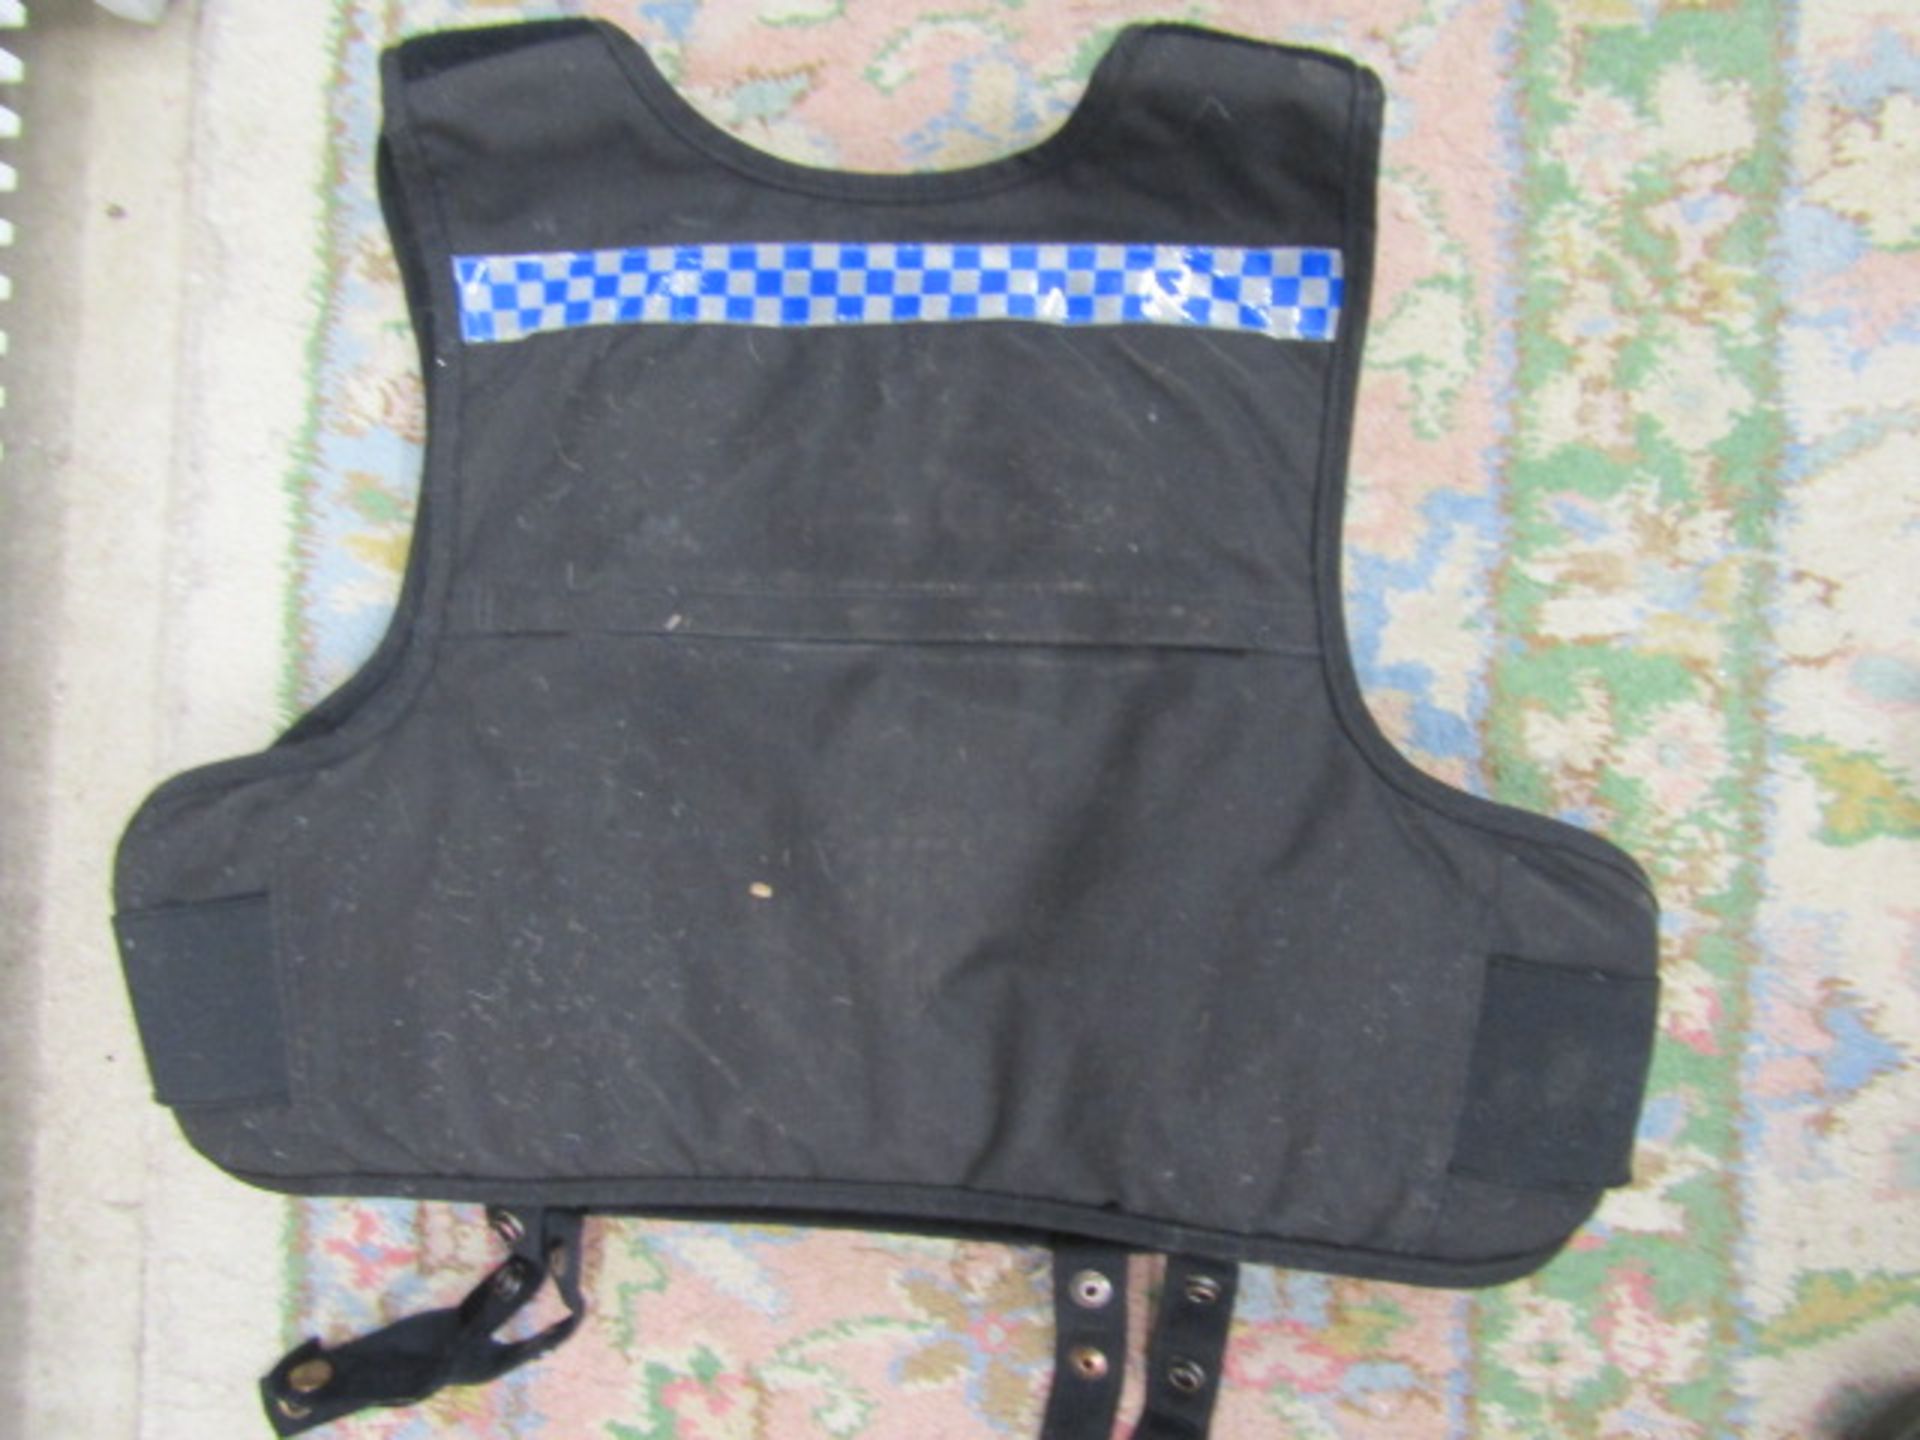 Ex police body armour size short/medium  These vests were bought from an established surplus dealers - Image 2 of 3